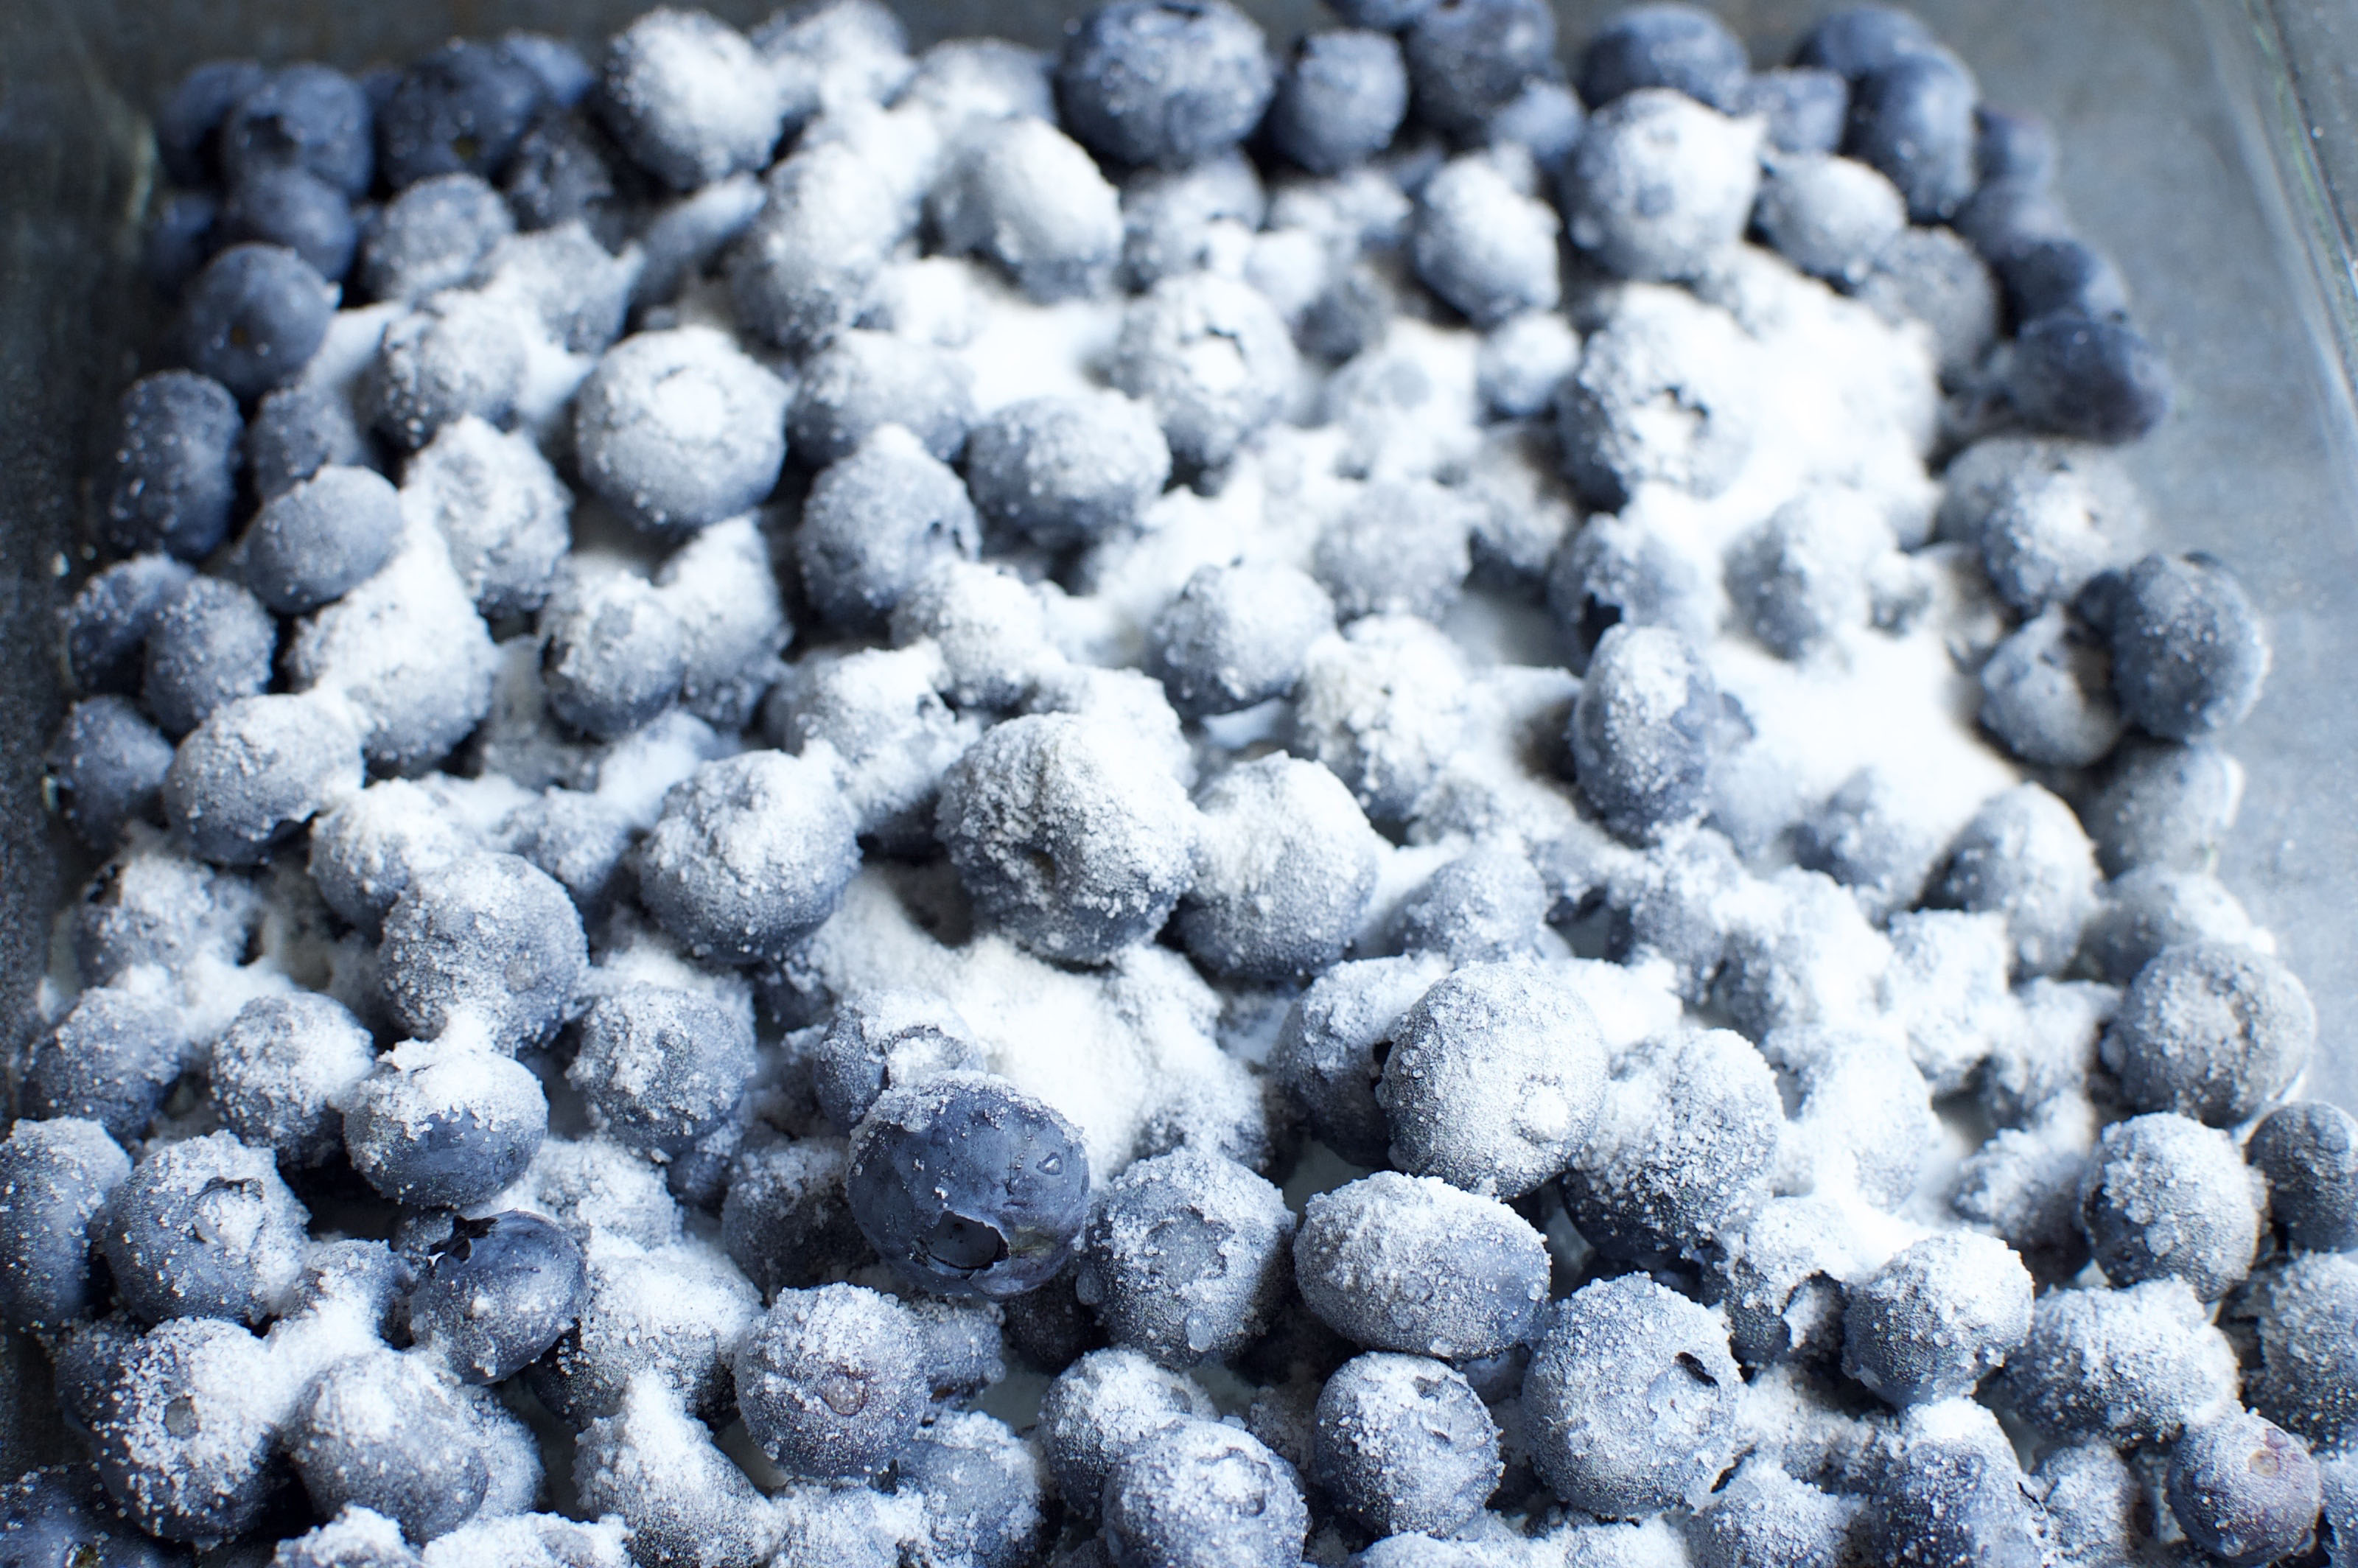 Low-Carb Old Fashioned Blueberry Cobbler